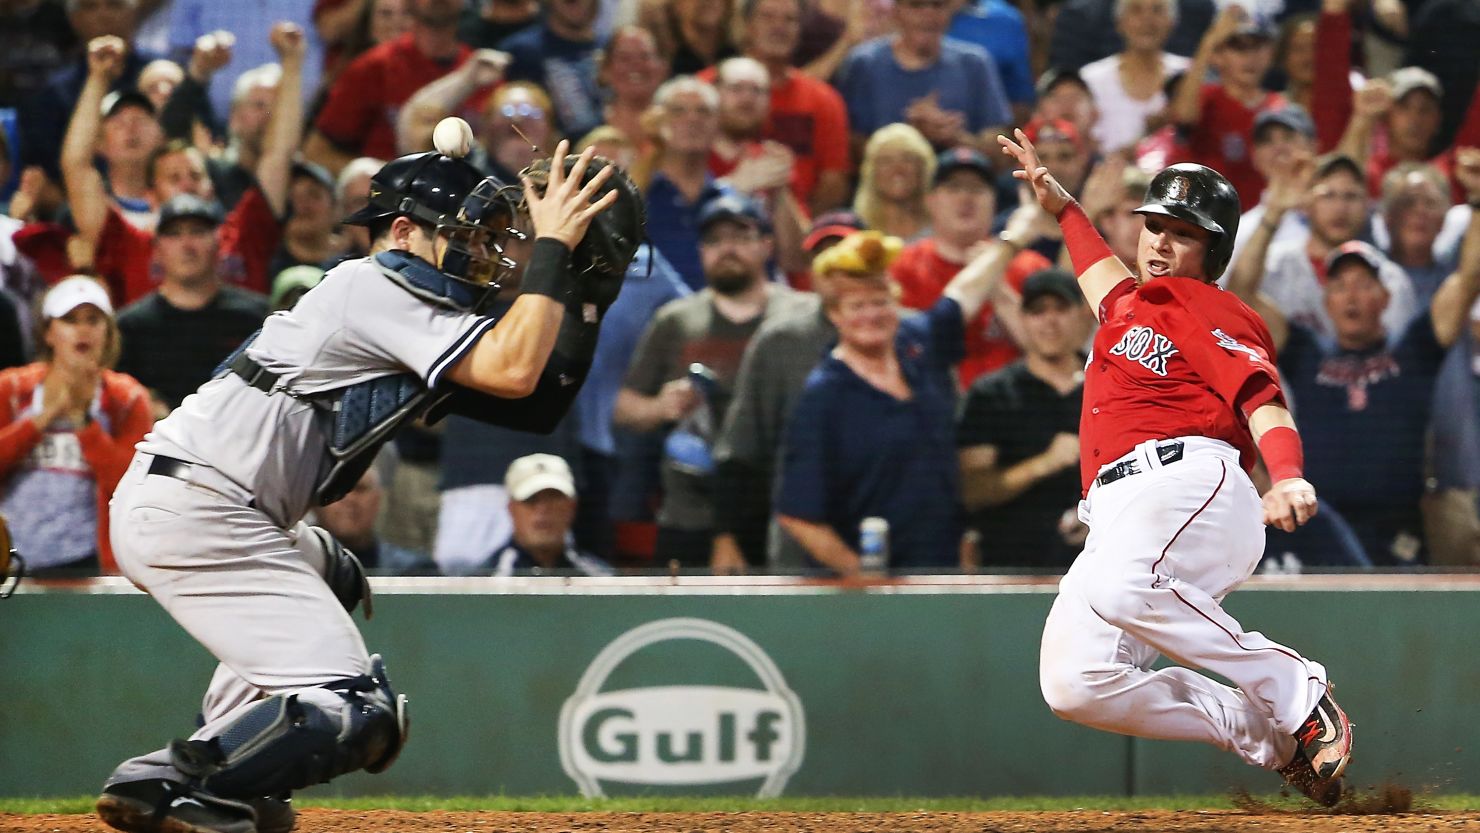 The Boston Red Sox will be the home team for the two games.